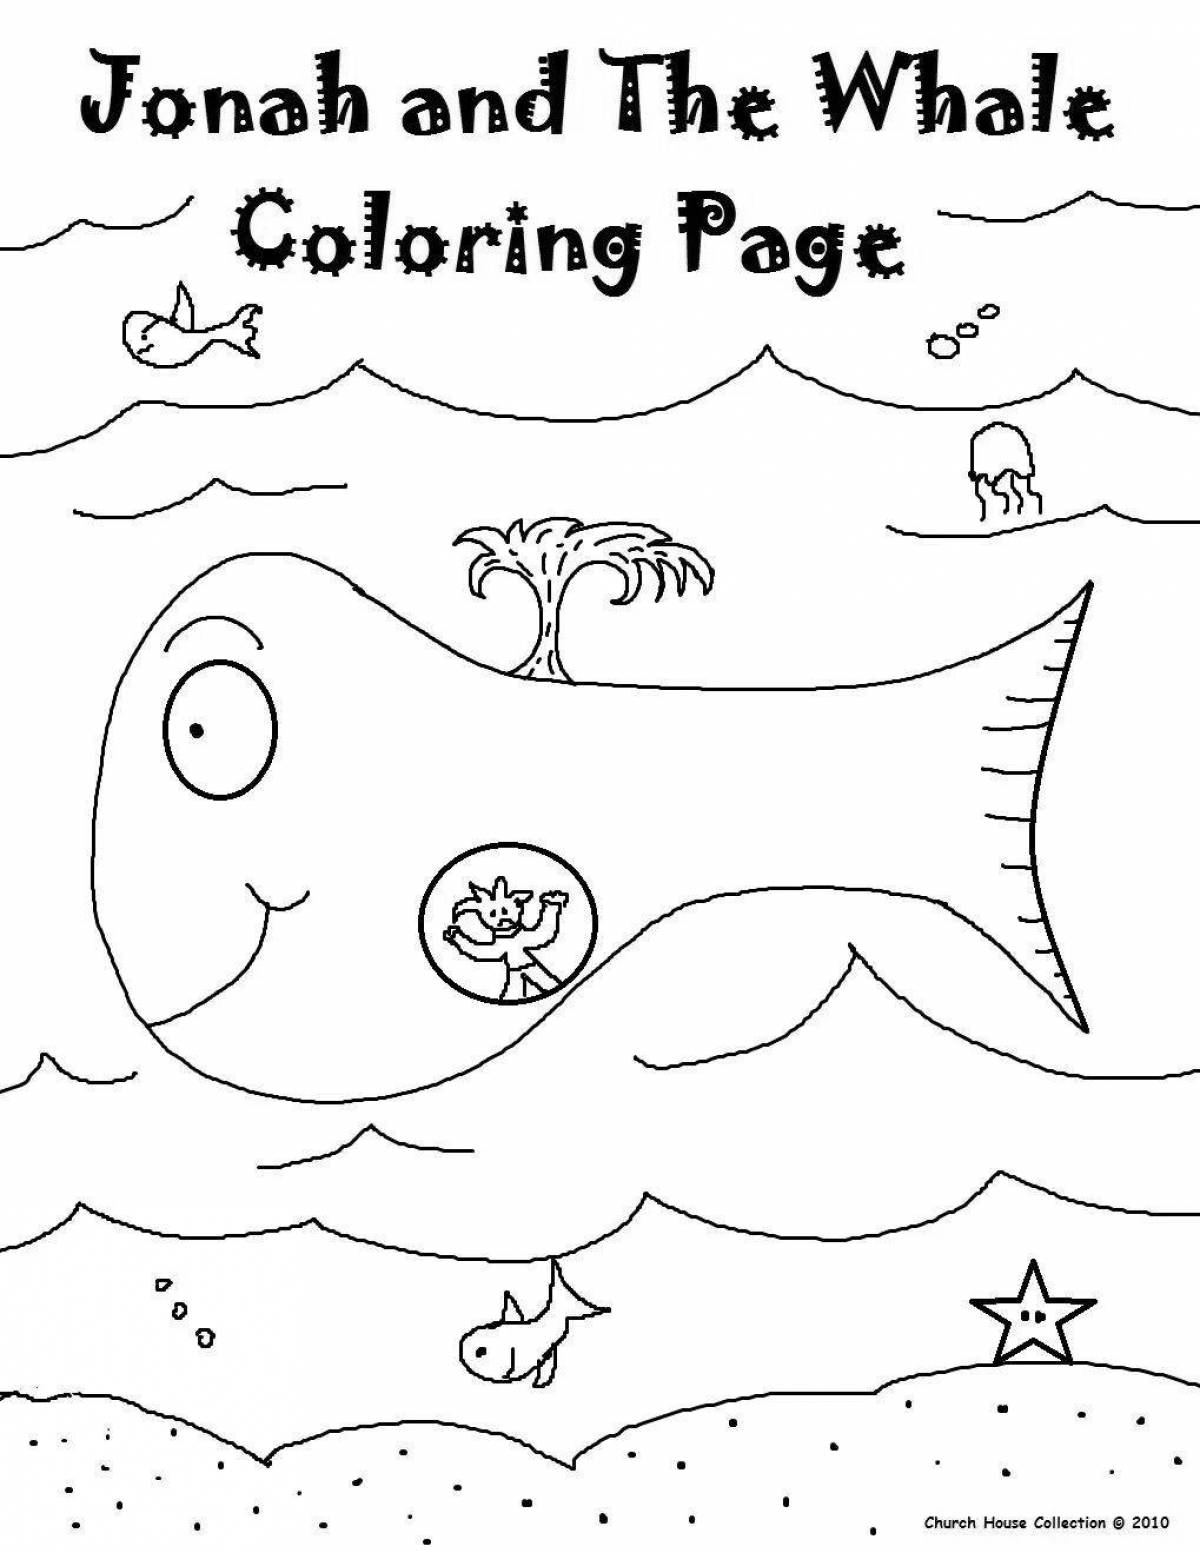 Exquisite whale and iona coloring book